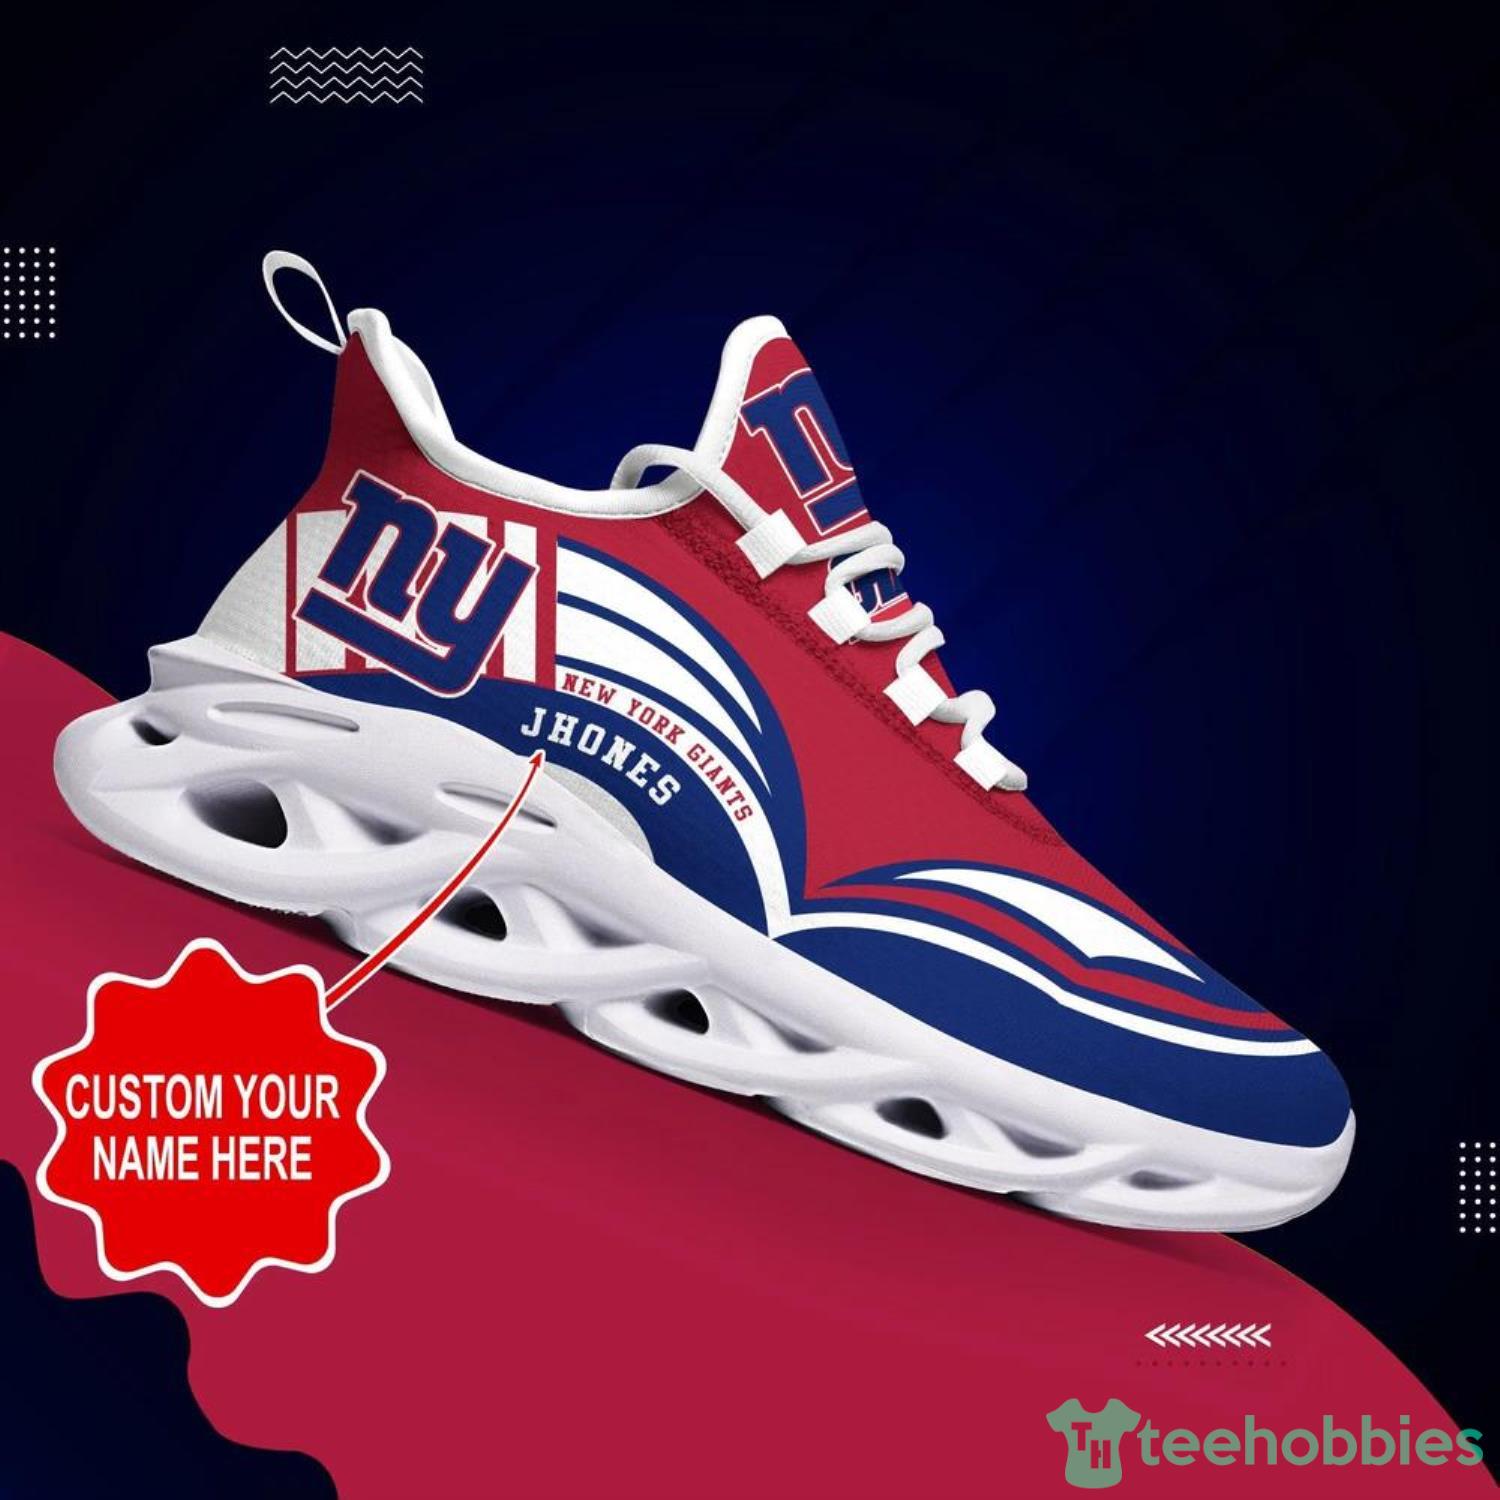 New York Giants NFL Max Soul Shoes Custom Name Sneakers For Men And Women - New York Giants NFL Max Soul Shoes Custom Name, Sneakers Hot Trending Personalized Gifts For NFL Fans_1